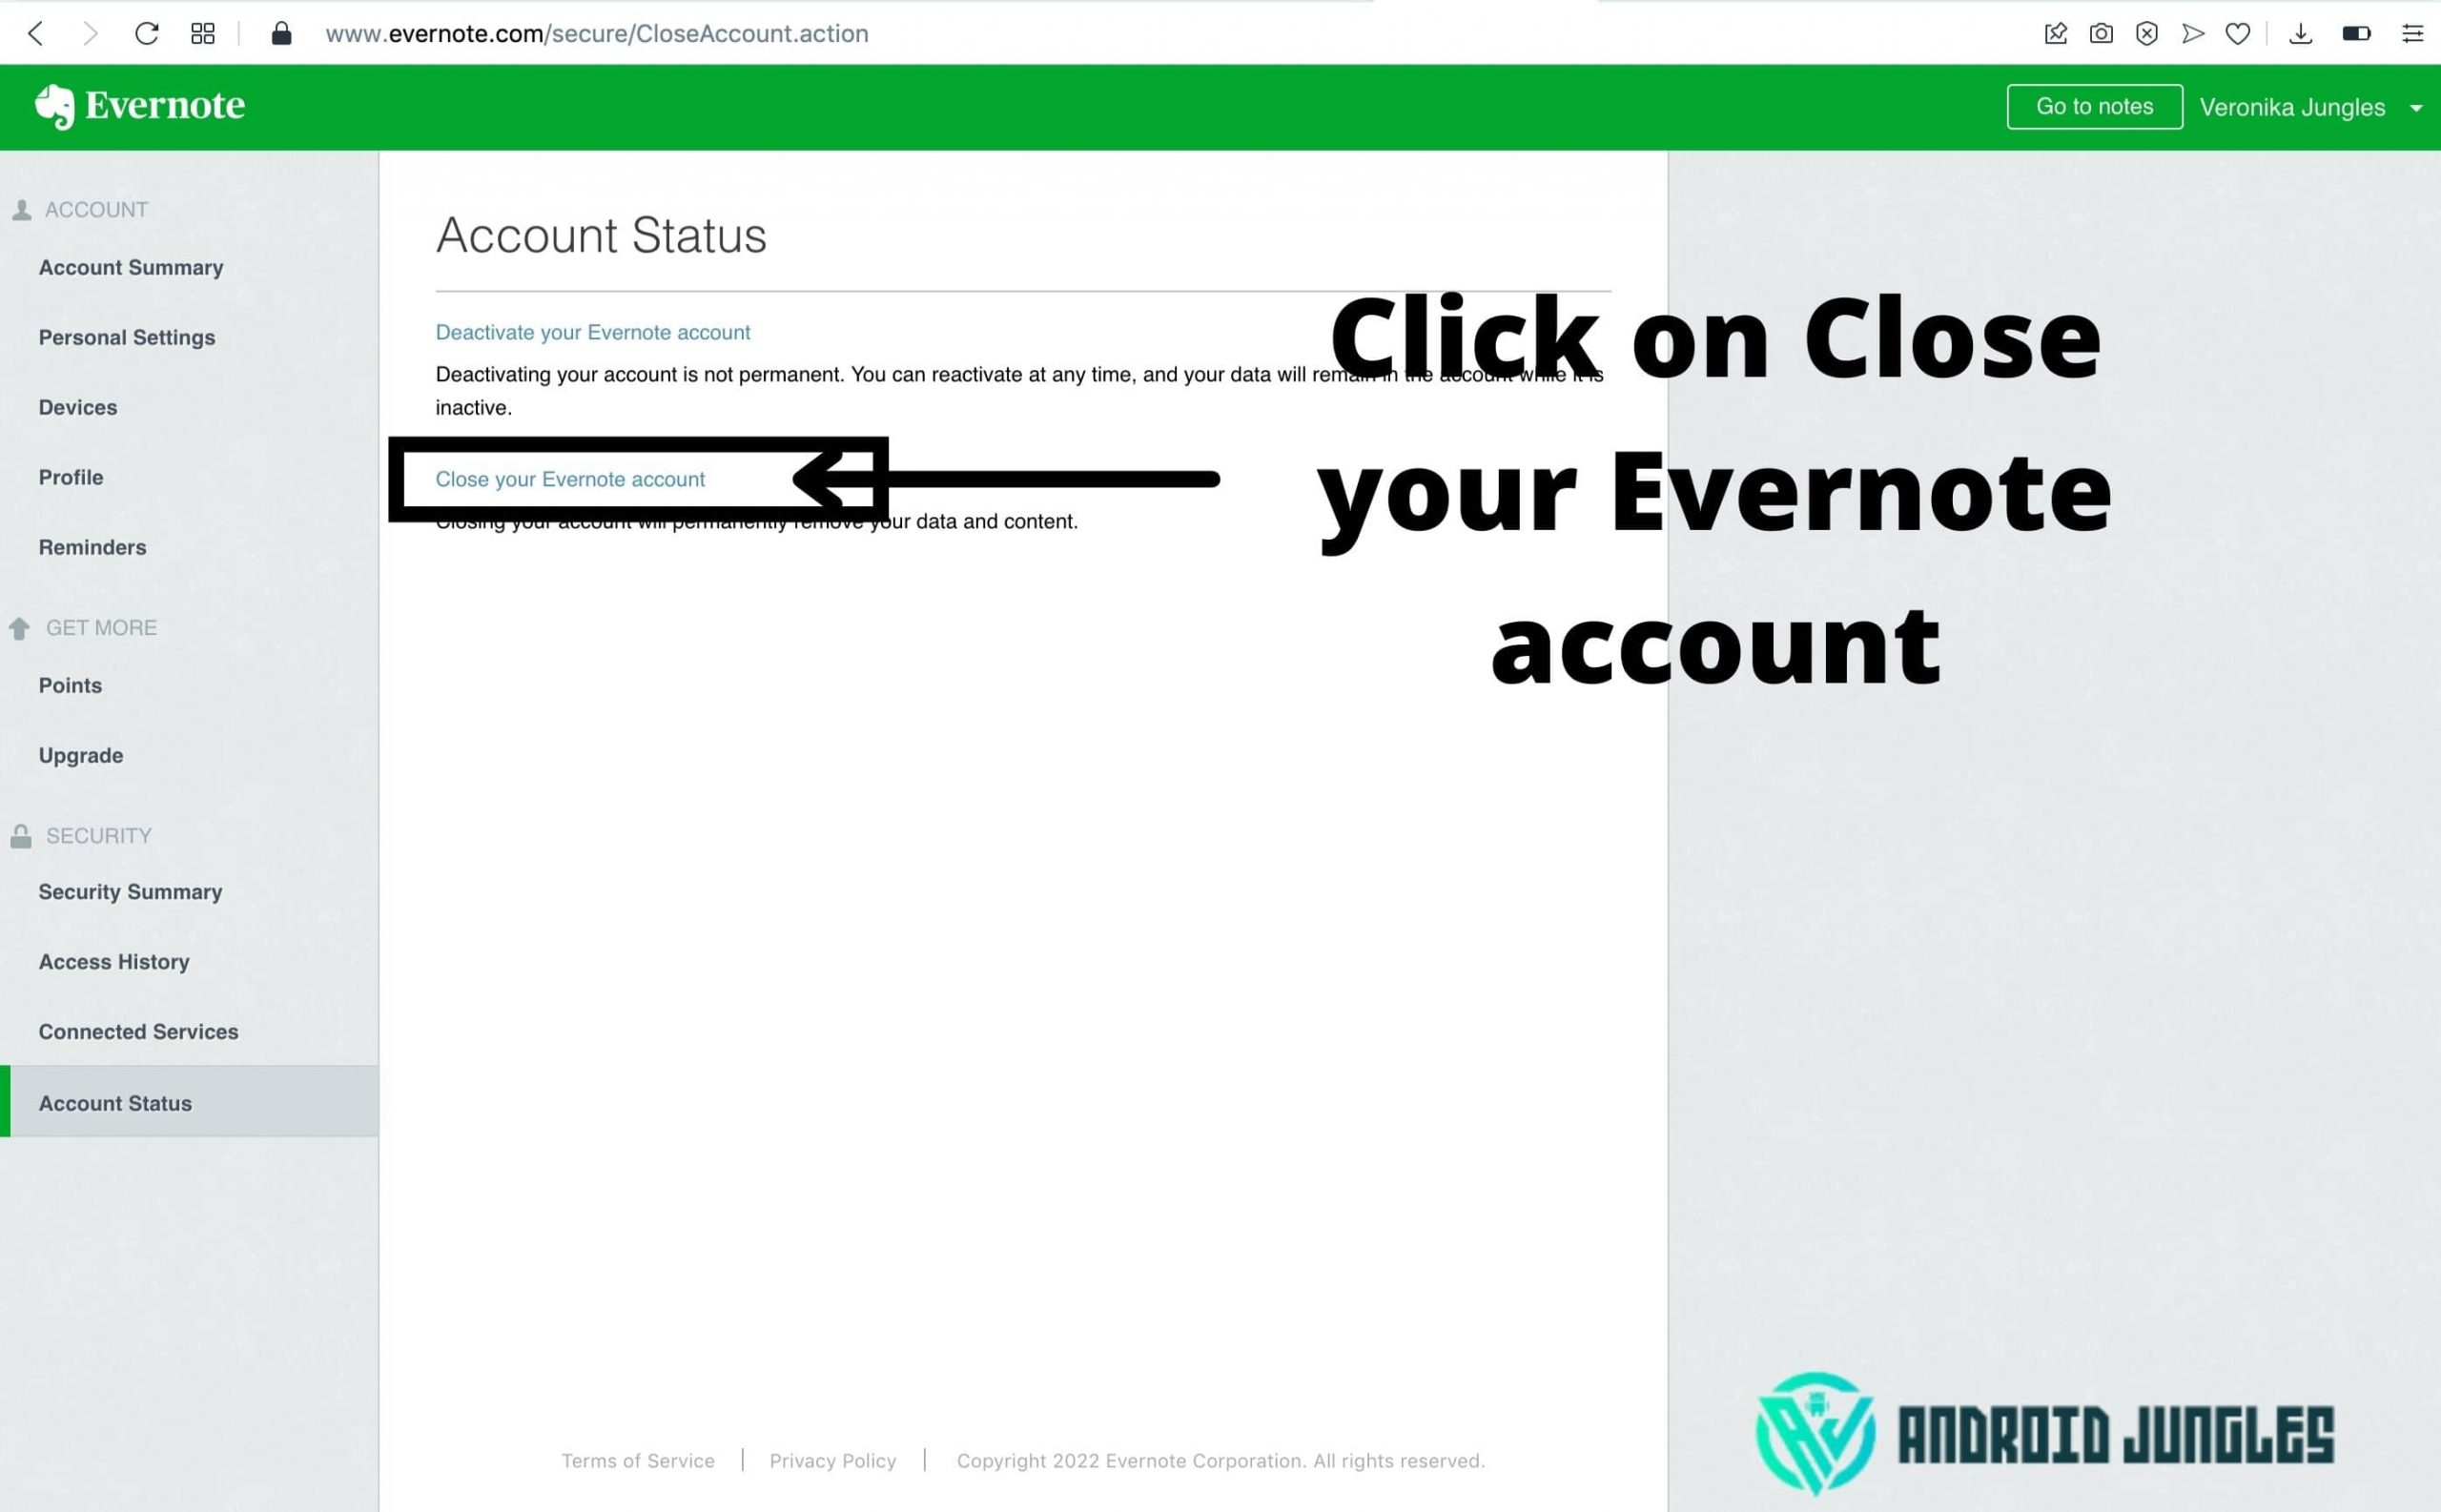 Click on Close your Evernote account